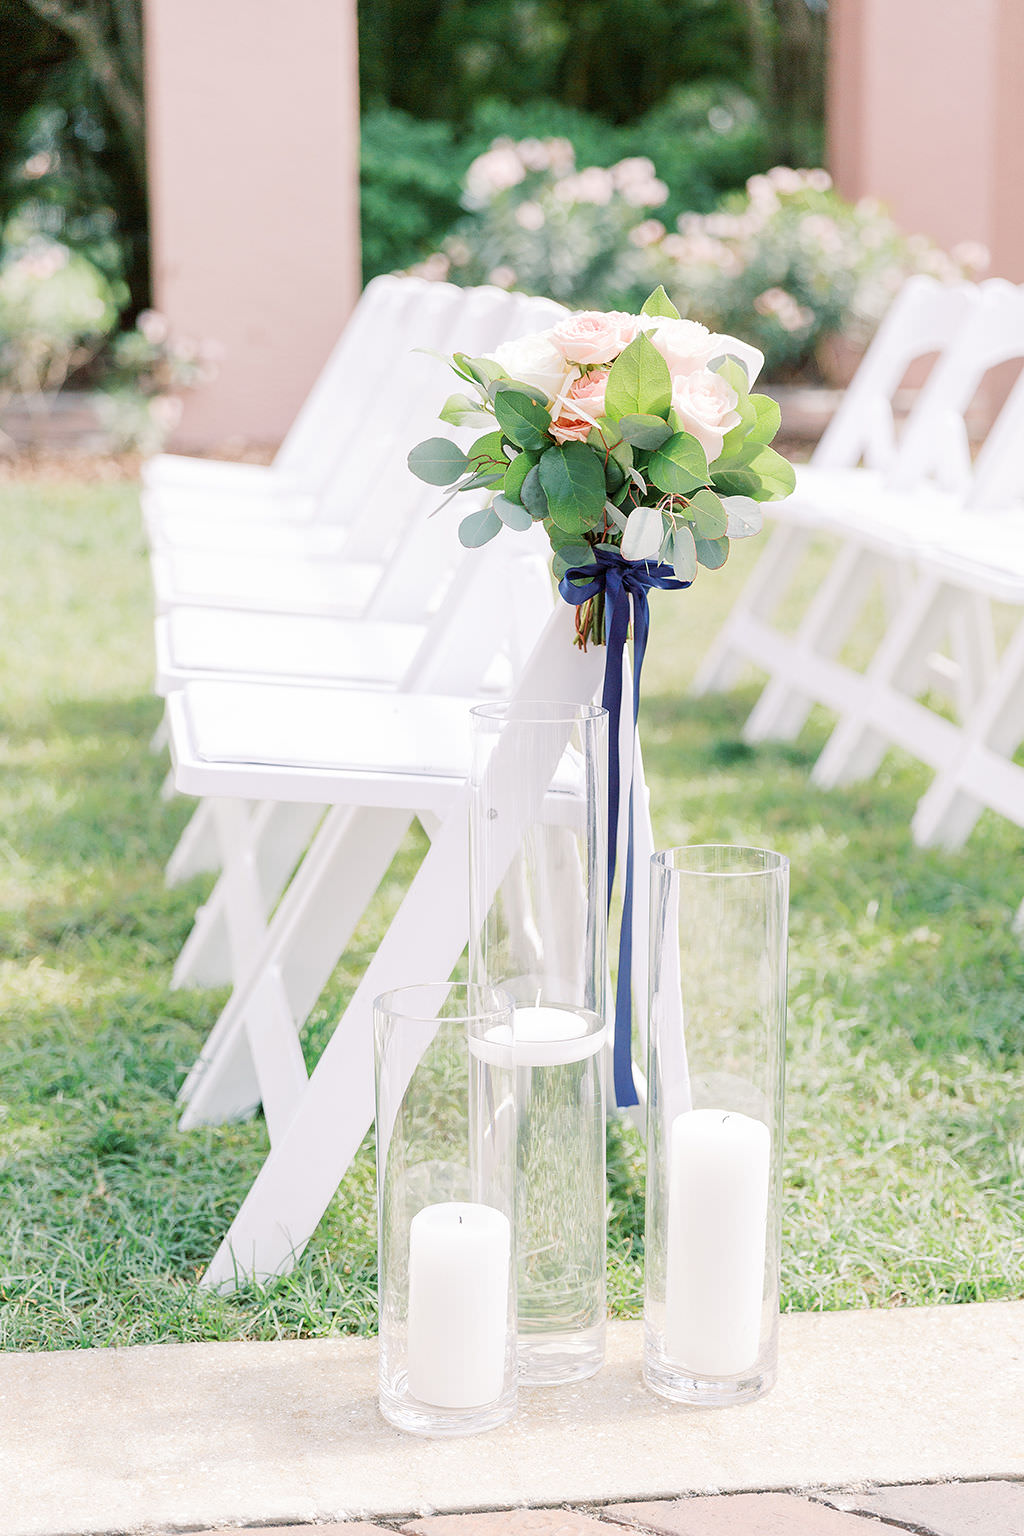 Tampa Bay Elegant Classic Wedding Ceremony Decor, White Folding Chairs with Eucalyptus Greenery, Blush Pink and Ivory Floral Arrangements, Tall Glass Hurricane Vases with Candles